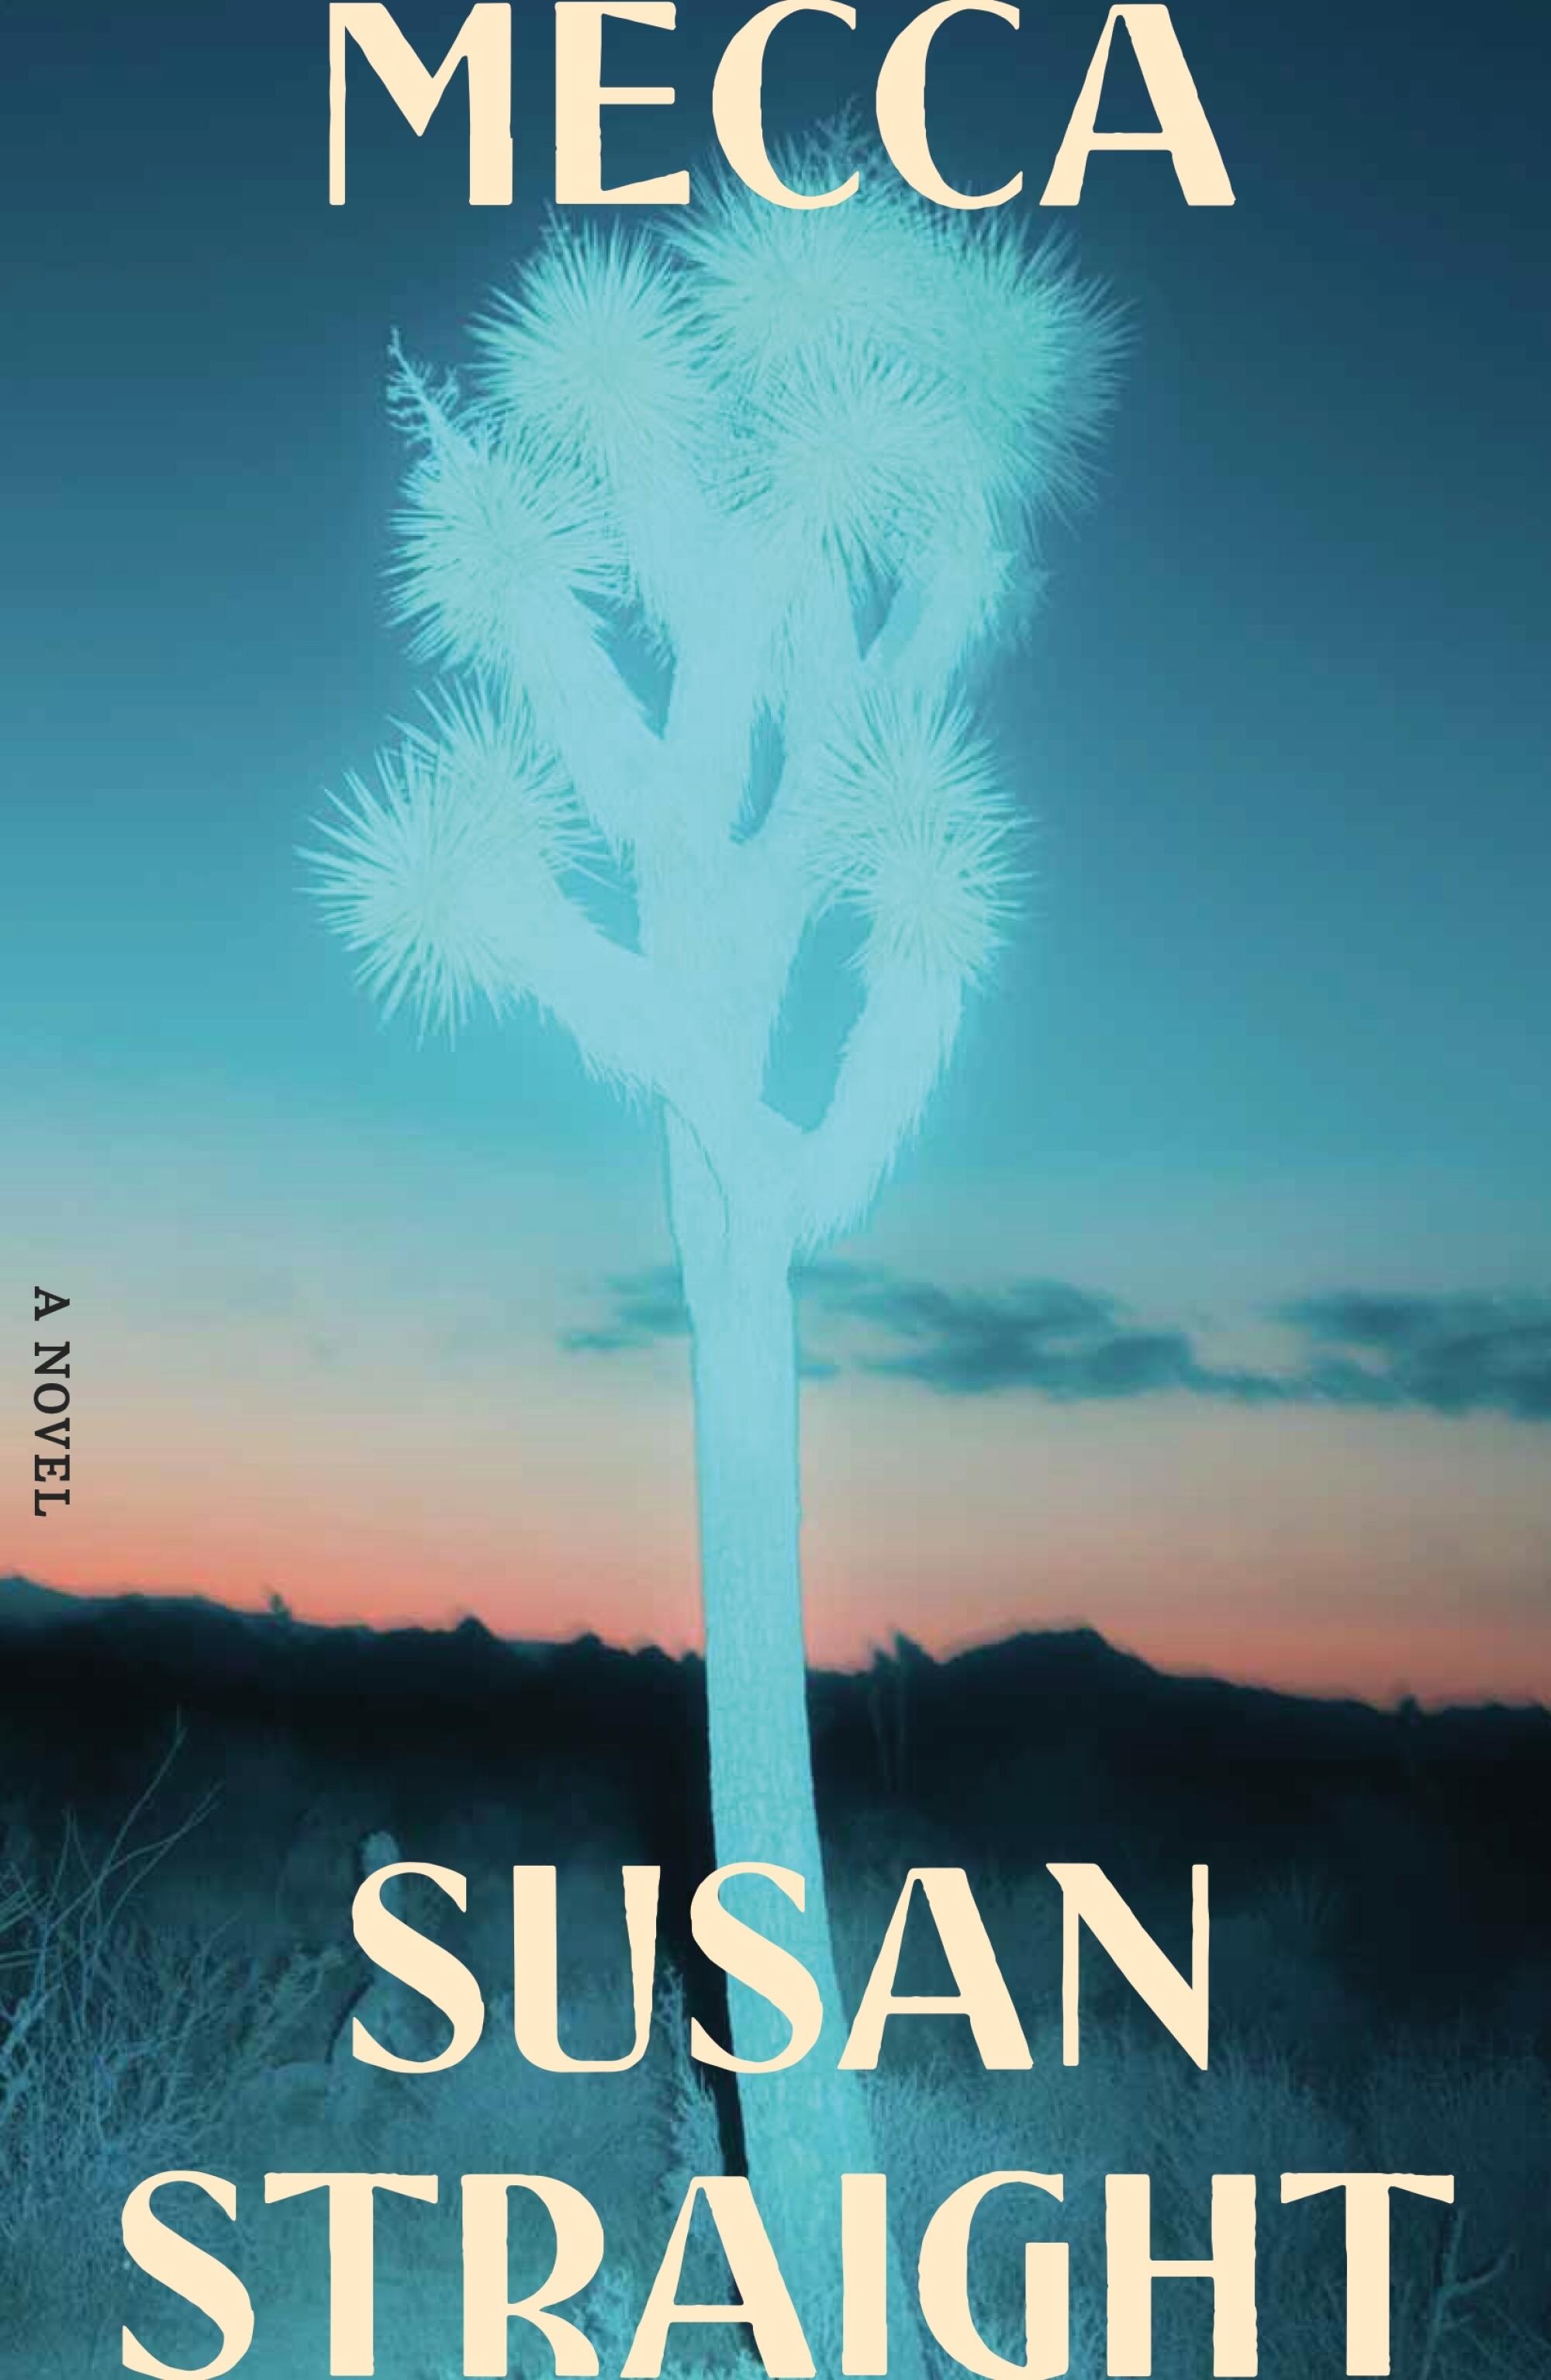 luminescent tree on cover of "Mecca," by Susan Straight